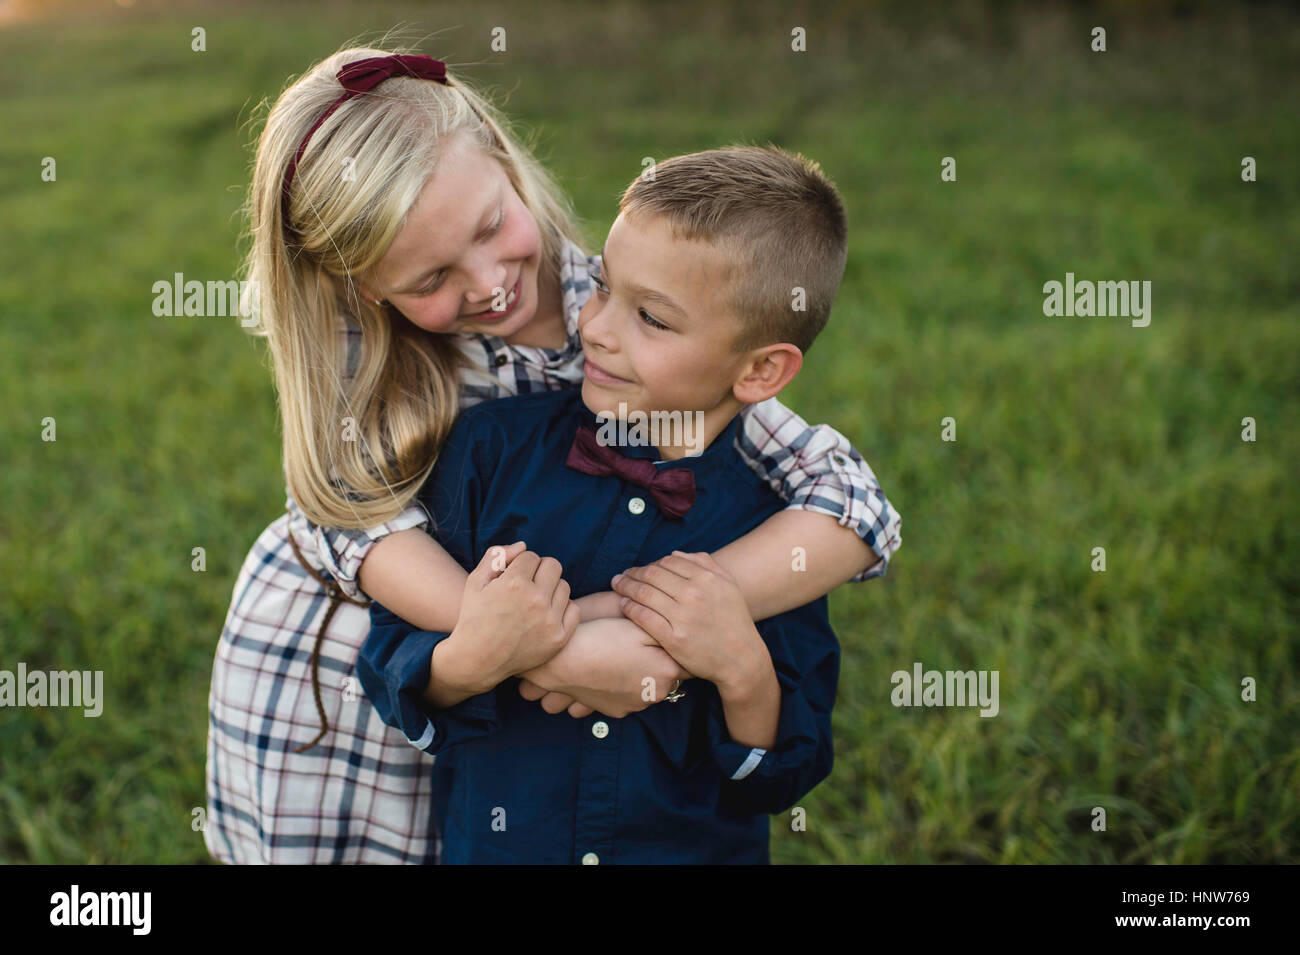 Sister hugging brother smiling Stock Photo